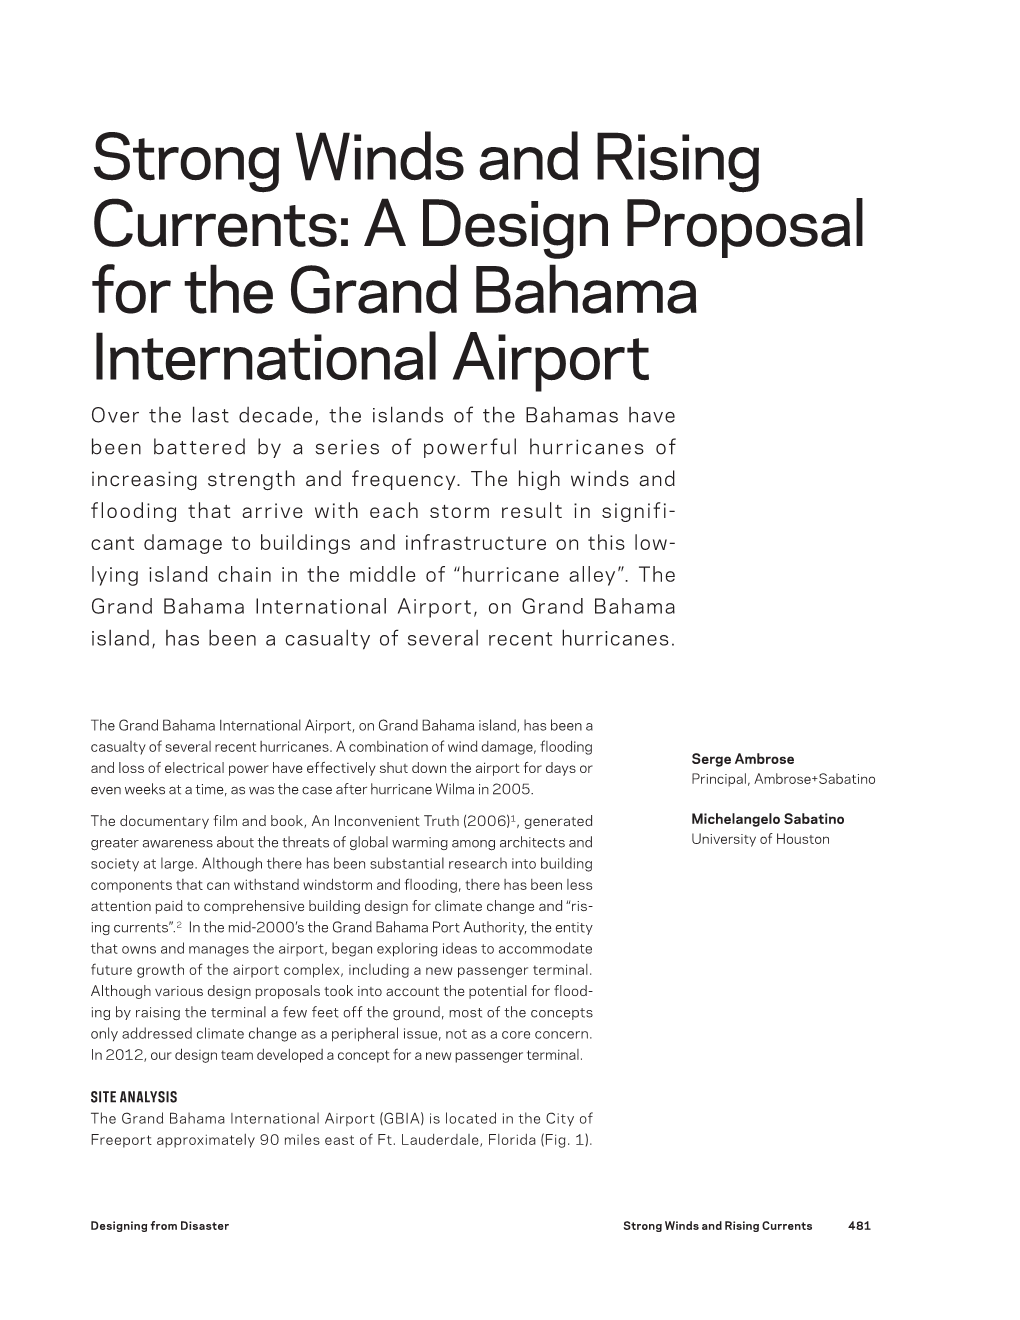 A Design Proposal for the Grand Bahama International Airport